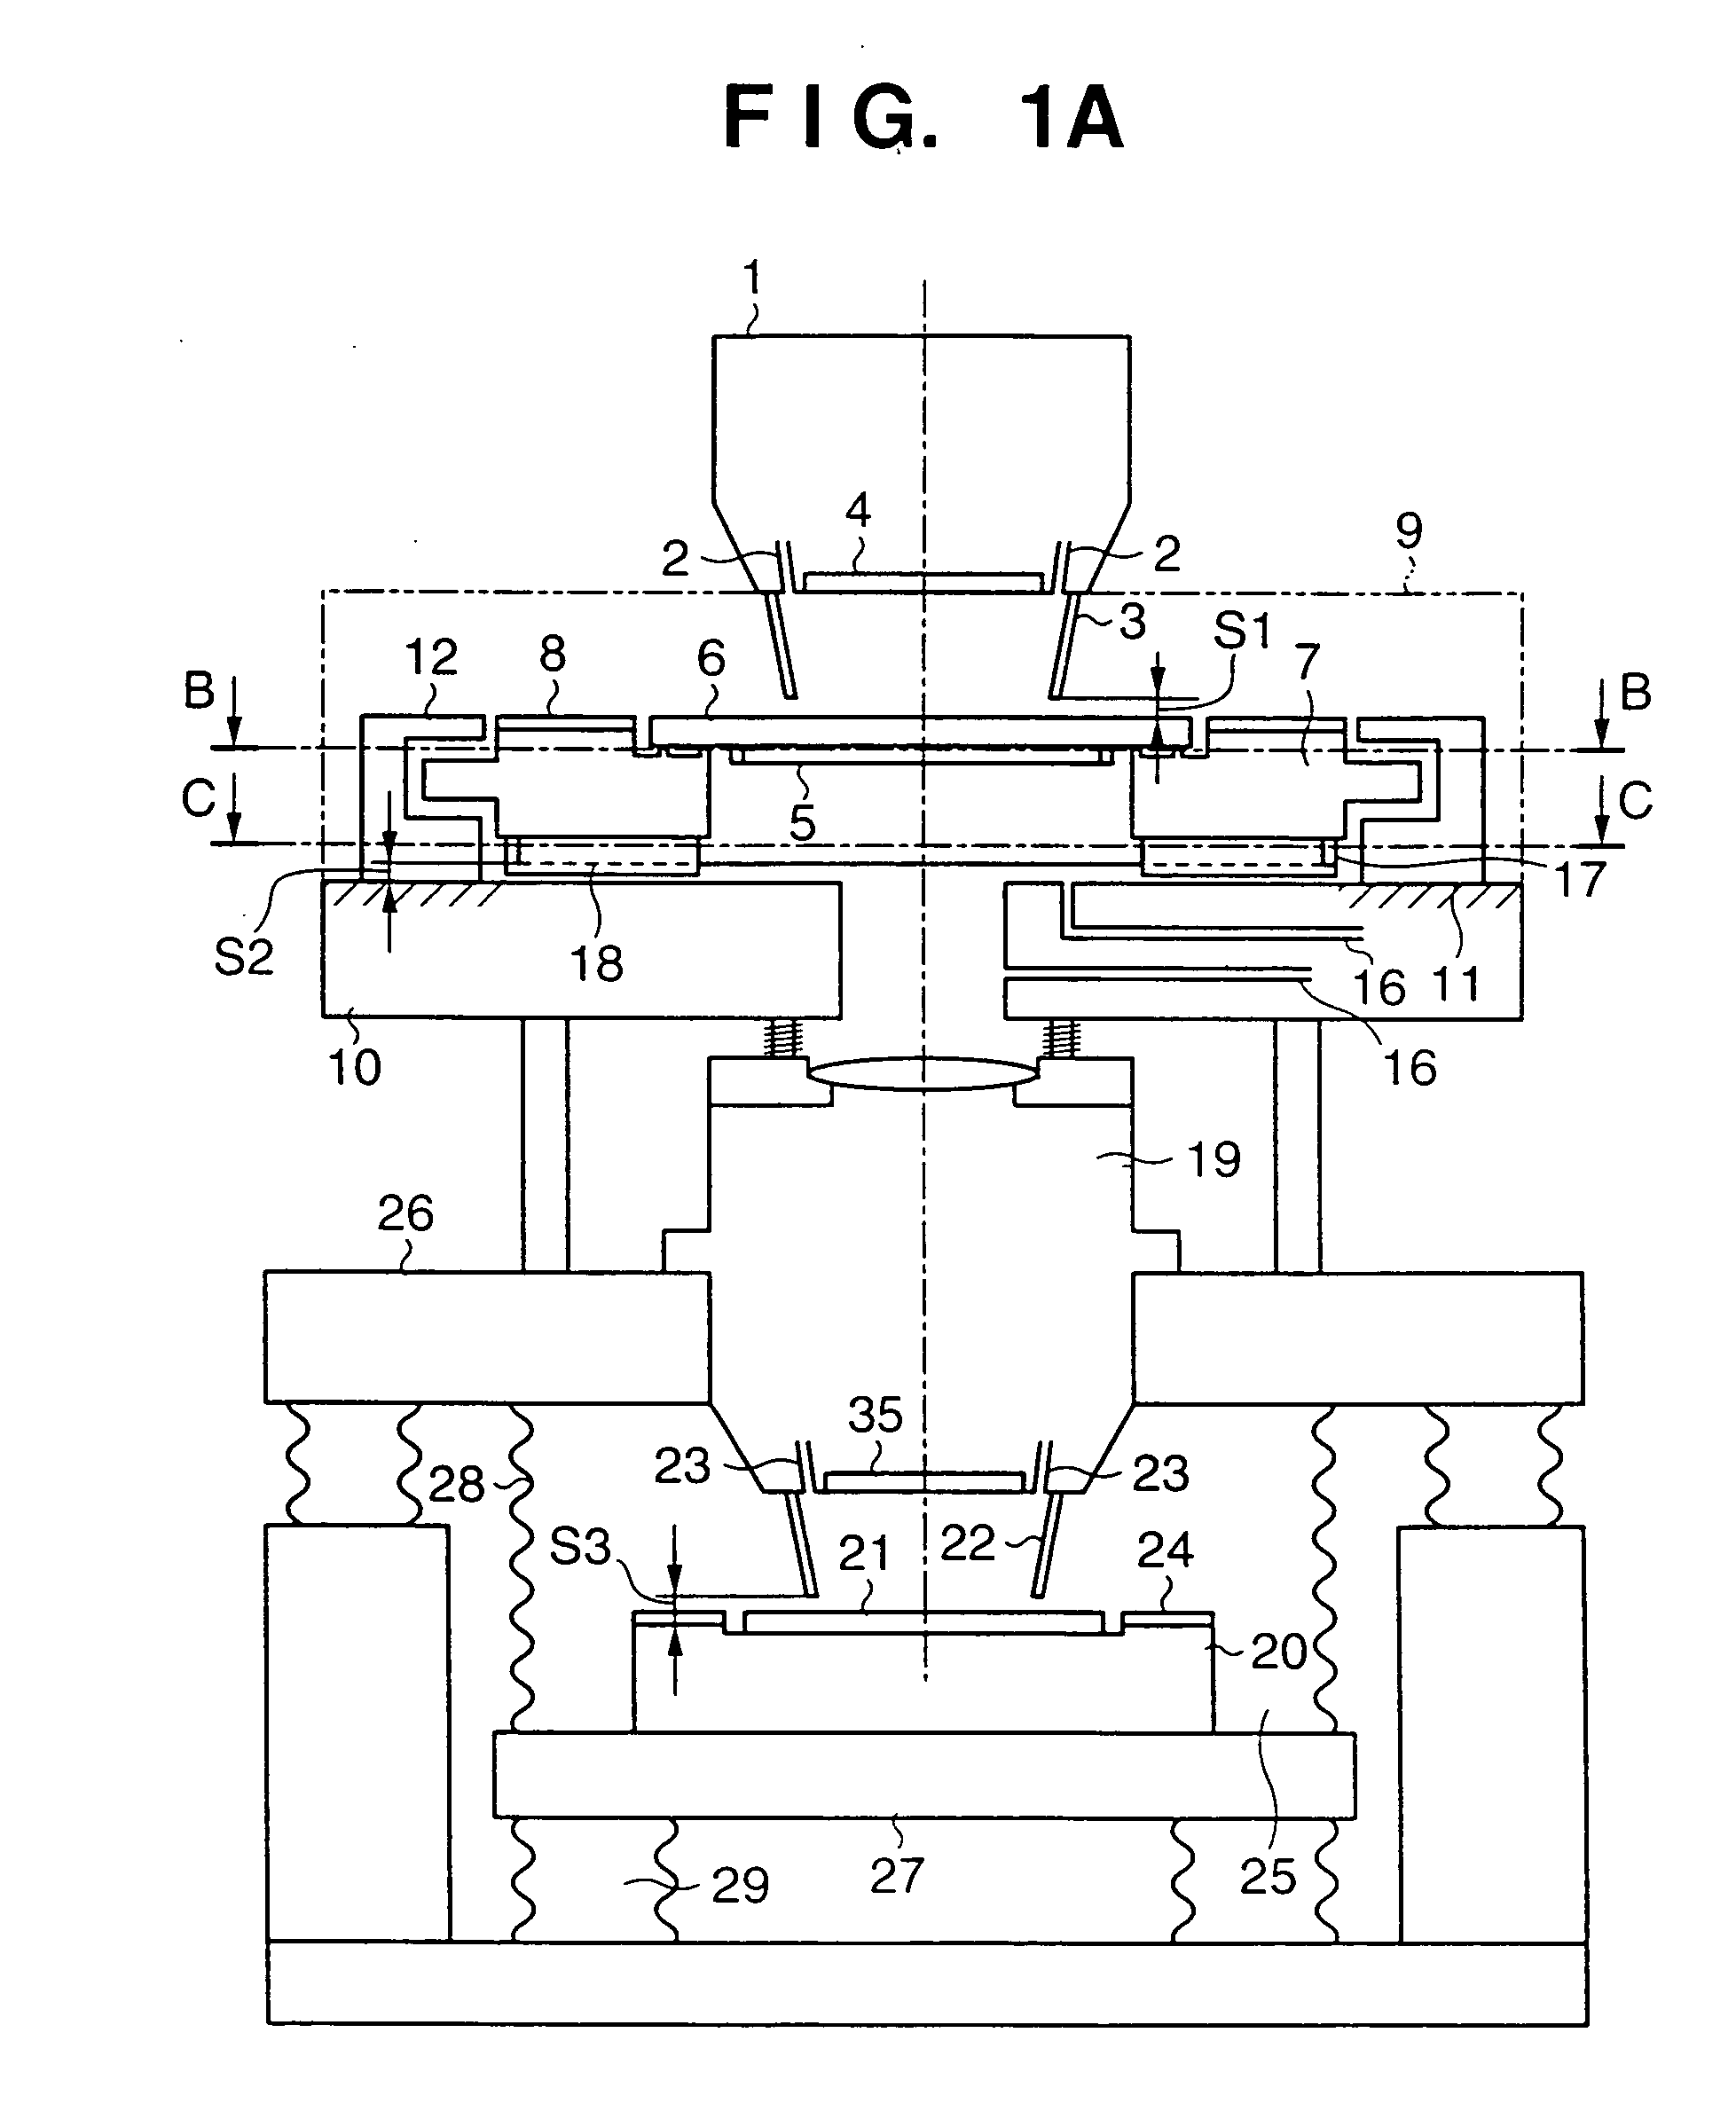 Exposure apparatus, maintenance method therefor, semiconductor device manufacturing method using the apparatus, and semiconductor manufacturing factory